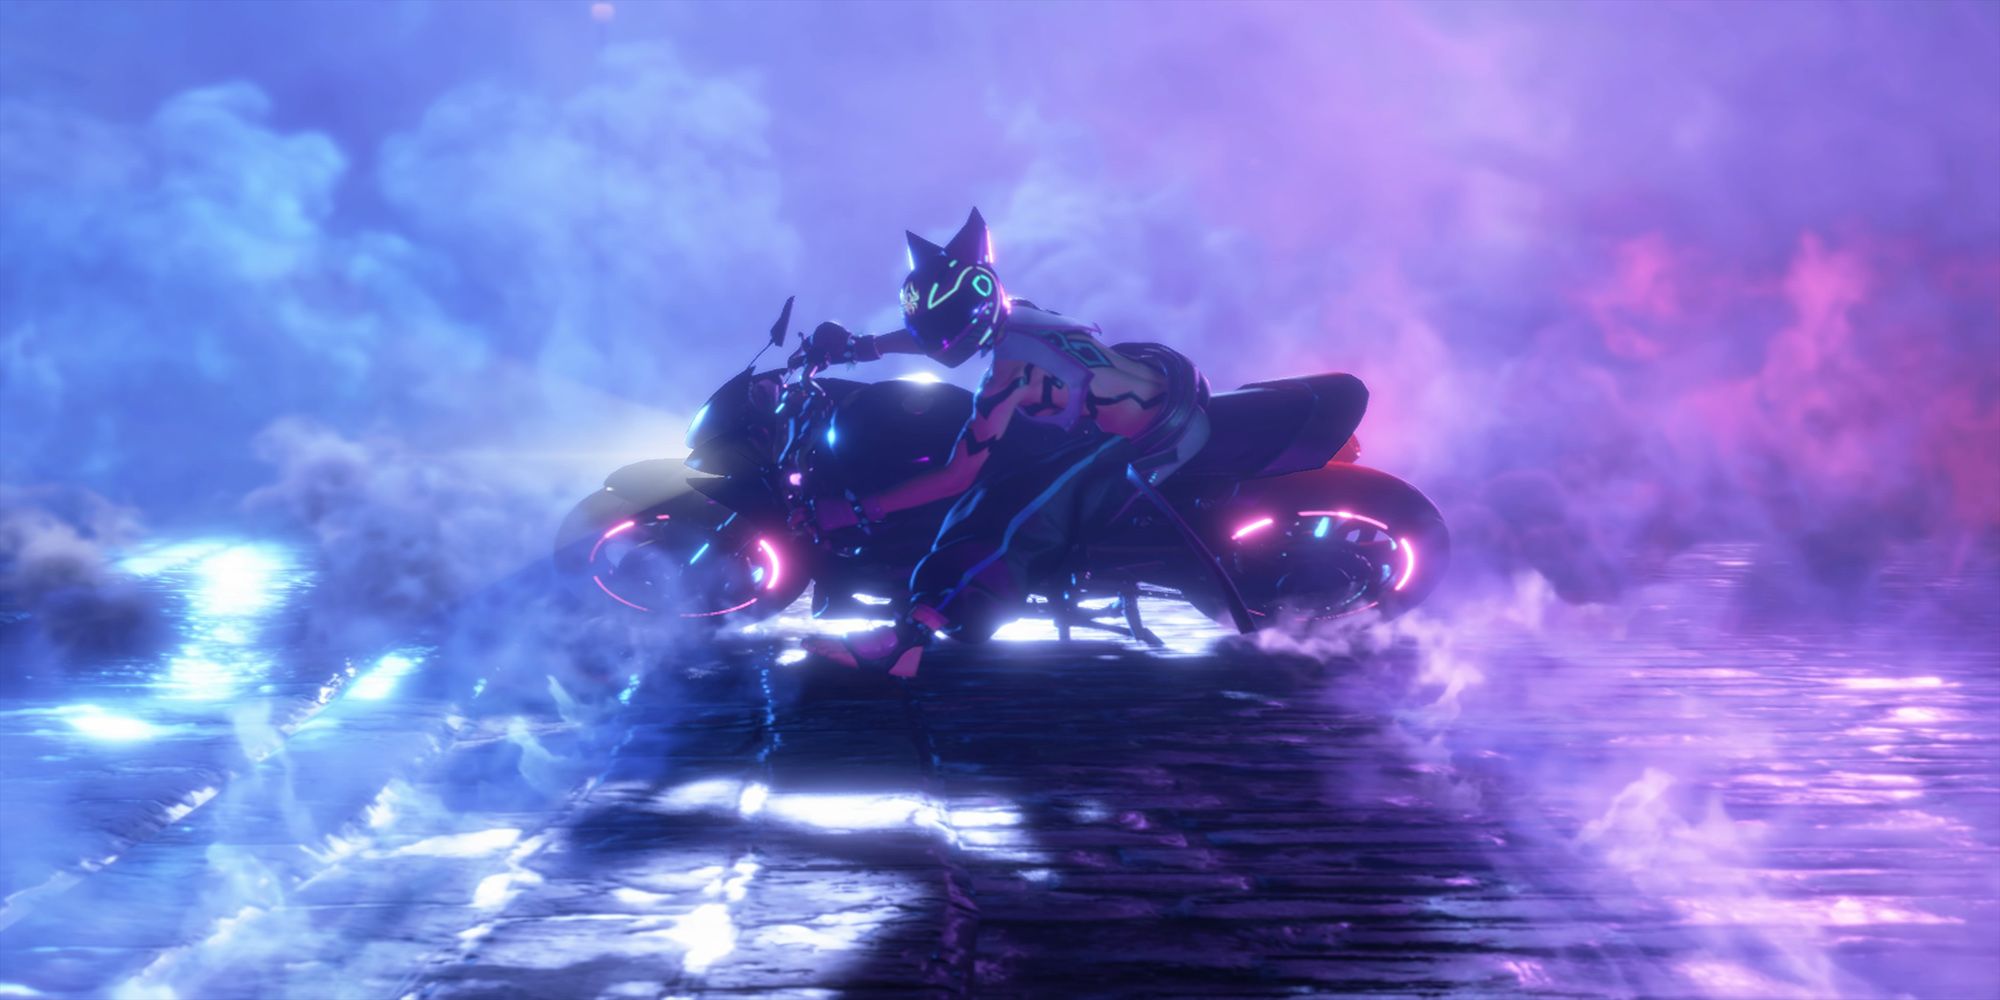 Jury glides down a paved road on his motorcycle in Street Fighter 6.